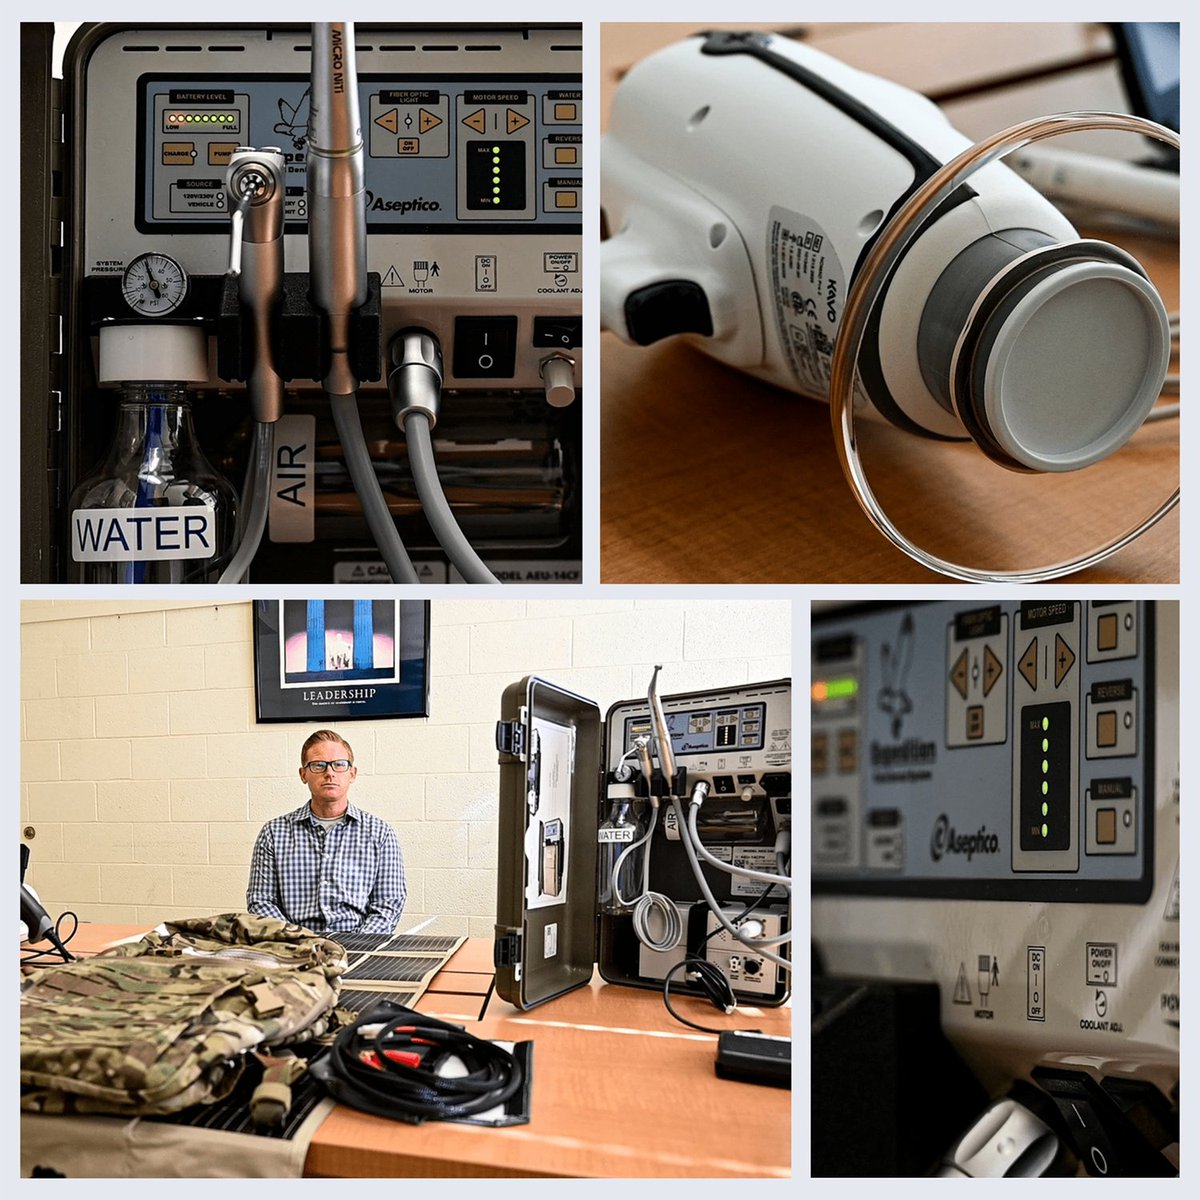 Aseptico is proud to work with the US Army to develop the AEU-14CFH, which brings dental care to deployed service members. #Army #USAMade #SalutetoService

The appearance of U.S. Department of Defense (DoD) visual information does not imply or constitute DoD endorsement.